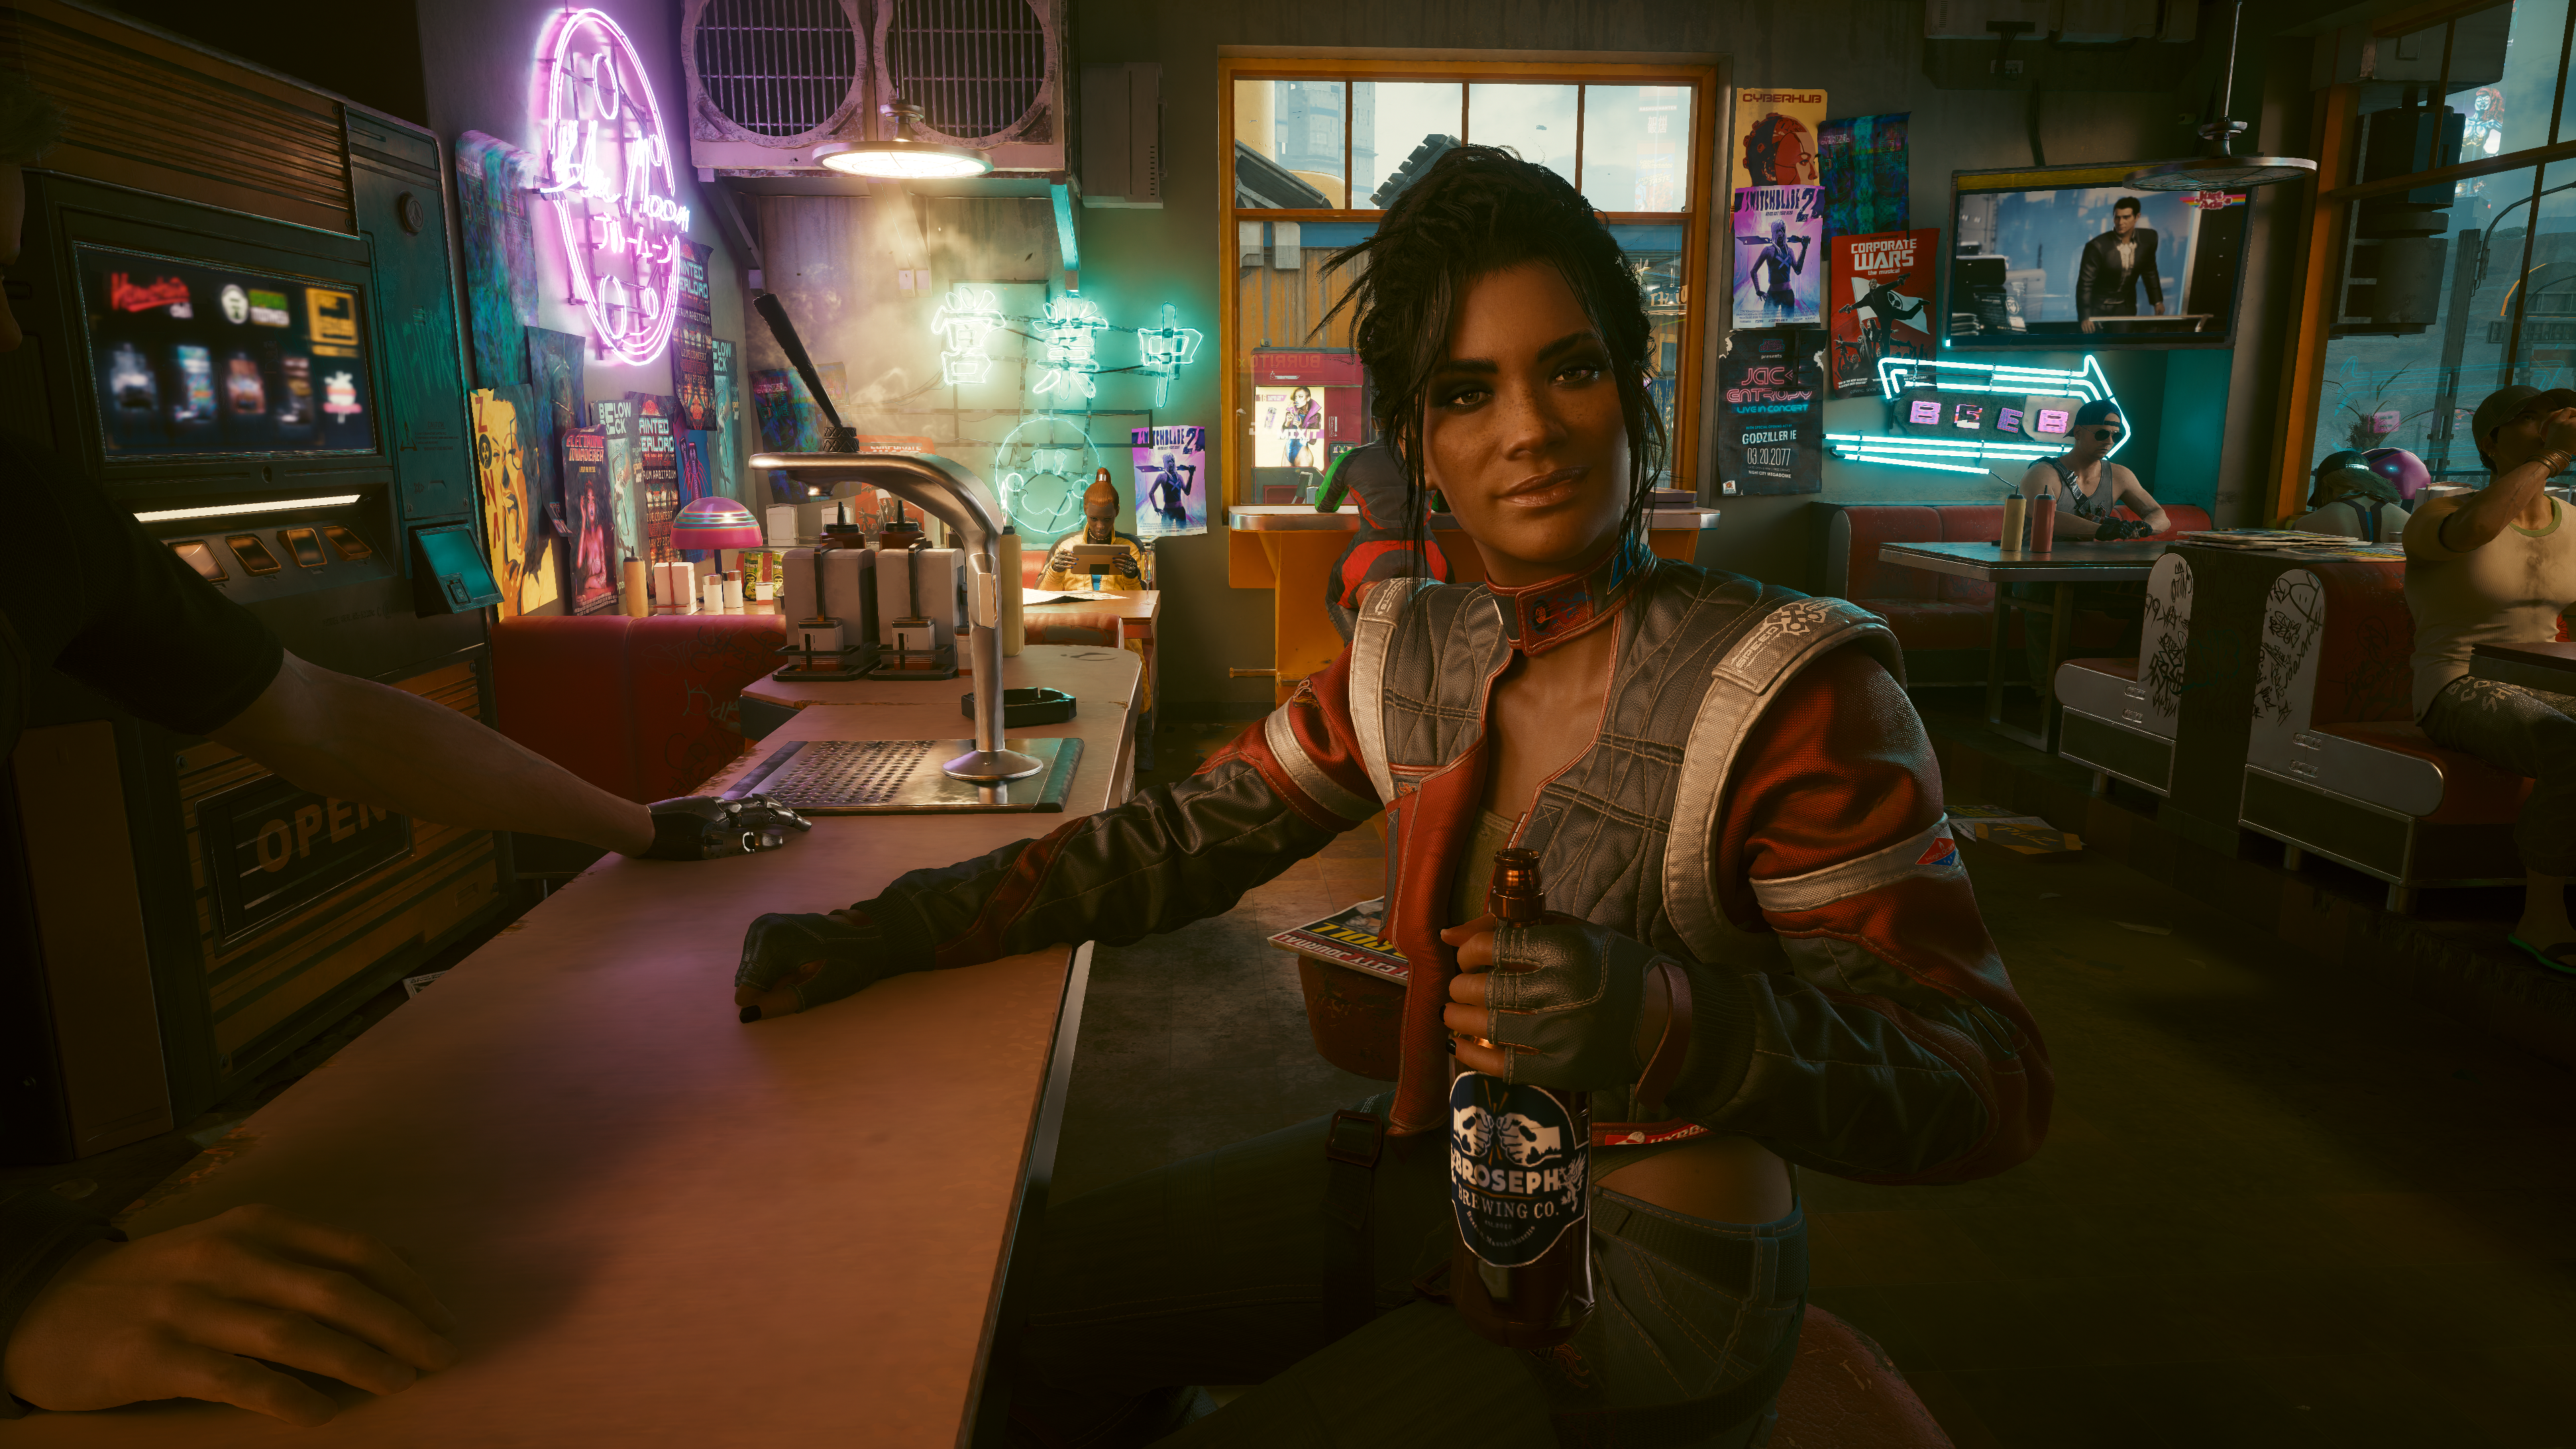 General 3840x2160 cyberpunk 2077 Panam Palmer Cyberpunk 2077 sitting video game characters CGI video game art screen shot video game girls bottles glass bottle Panam Palmer digital art short hair looking at viewer bar neon jacket drink video games closed mouth black nails painted nails signs TV poster POV